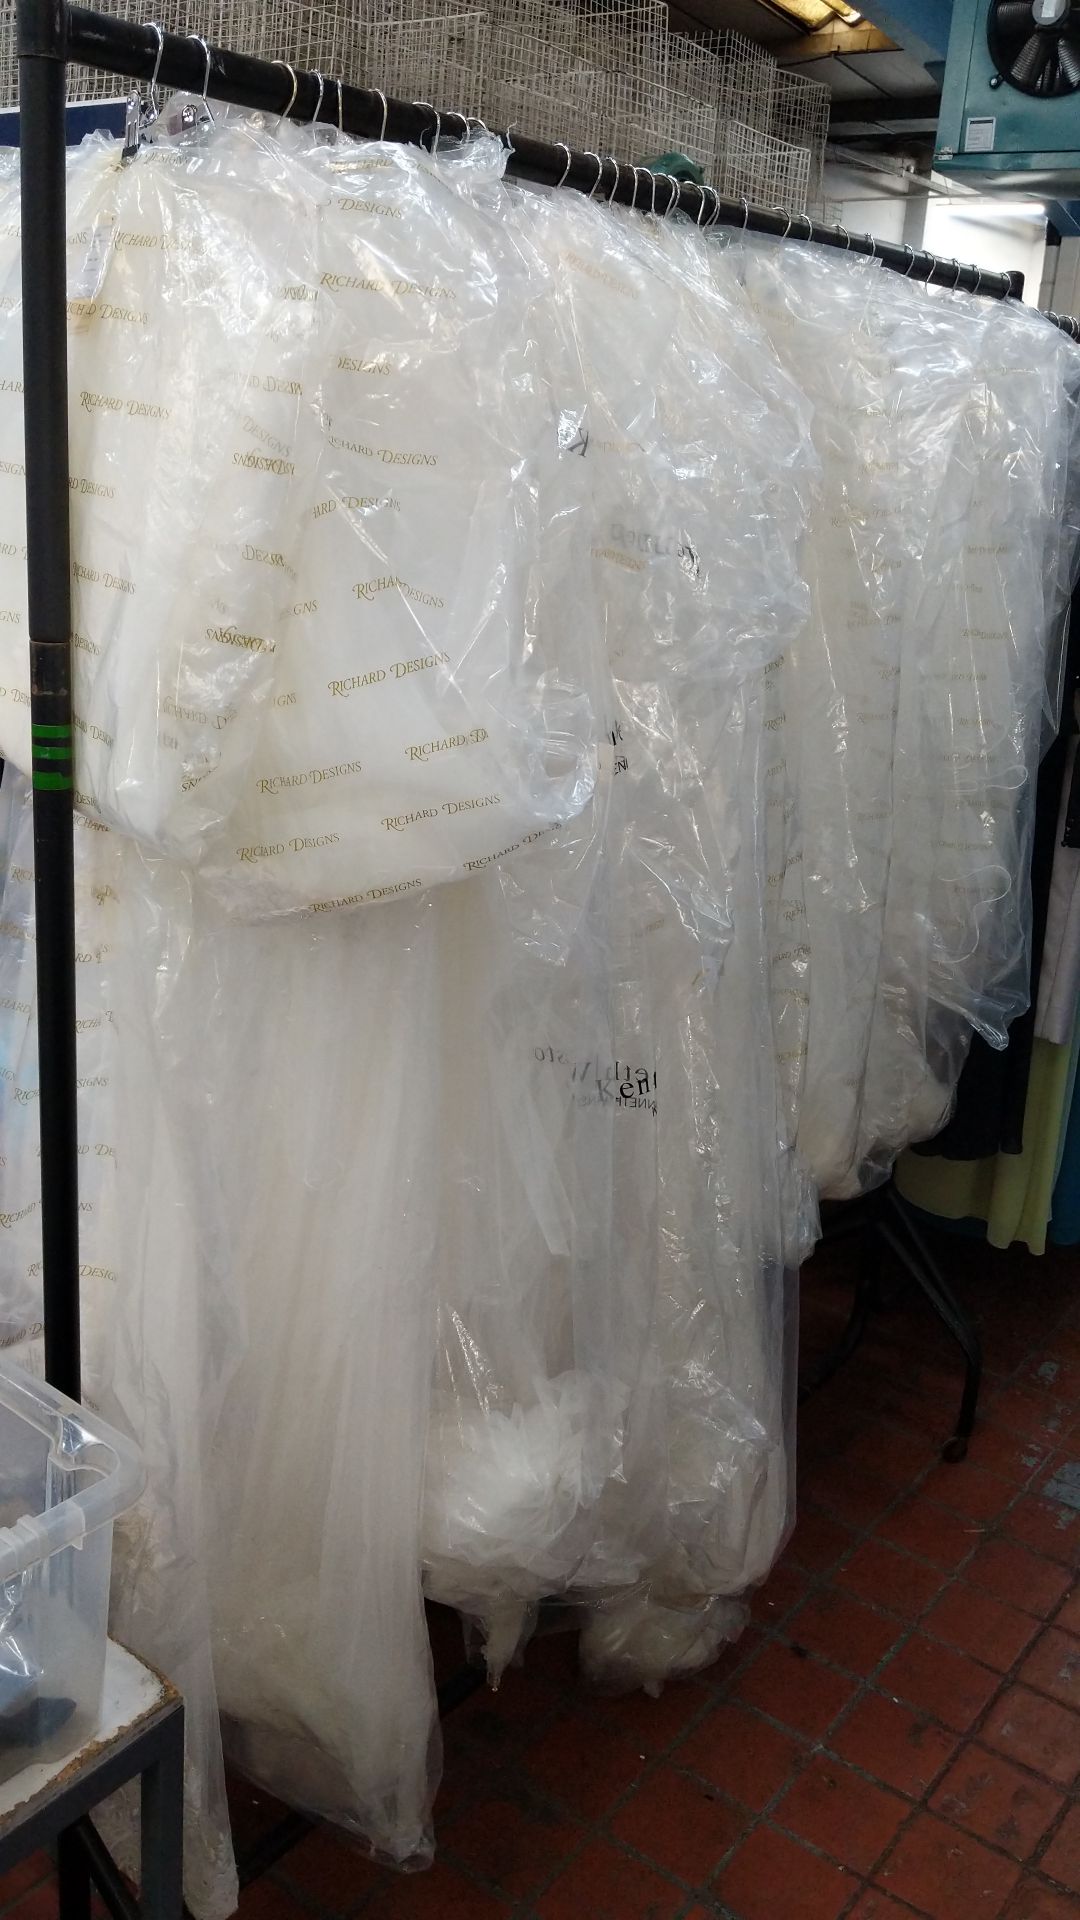 Approximately 29 assorted bridal veils IMPORTANT: Please remember goods successfully bid upon must